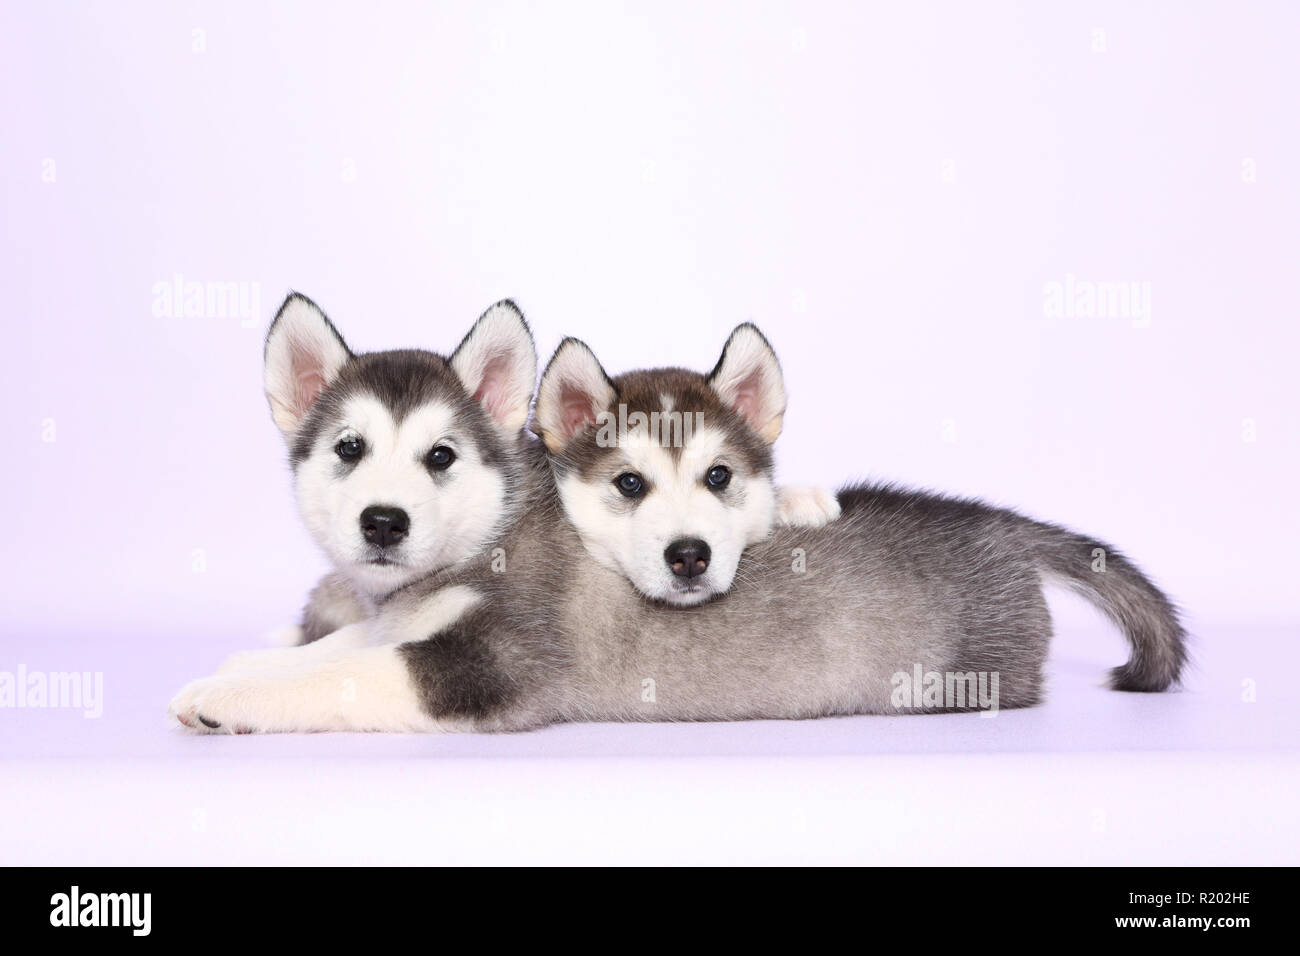 Alaskan Malamute. Two puppies (6 weeks old) lying. Studio picture, seen against a purple background. Germany Stock Photo